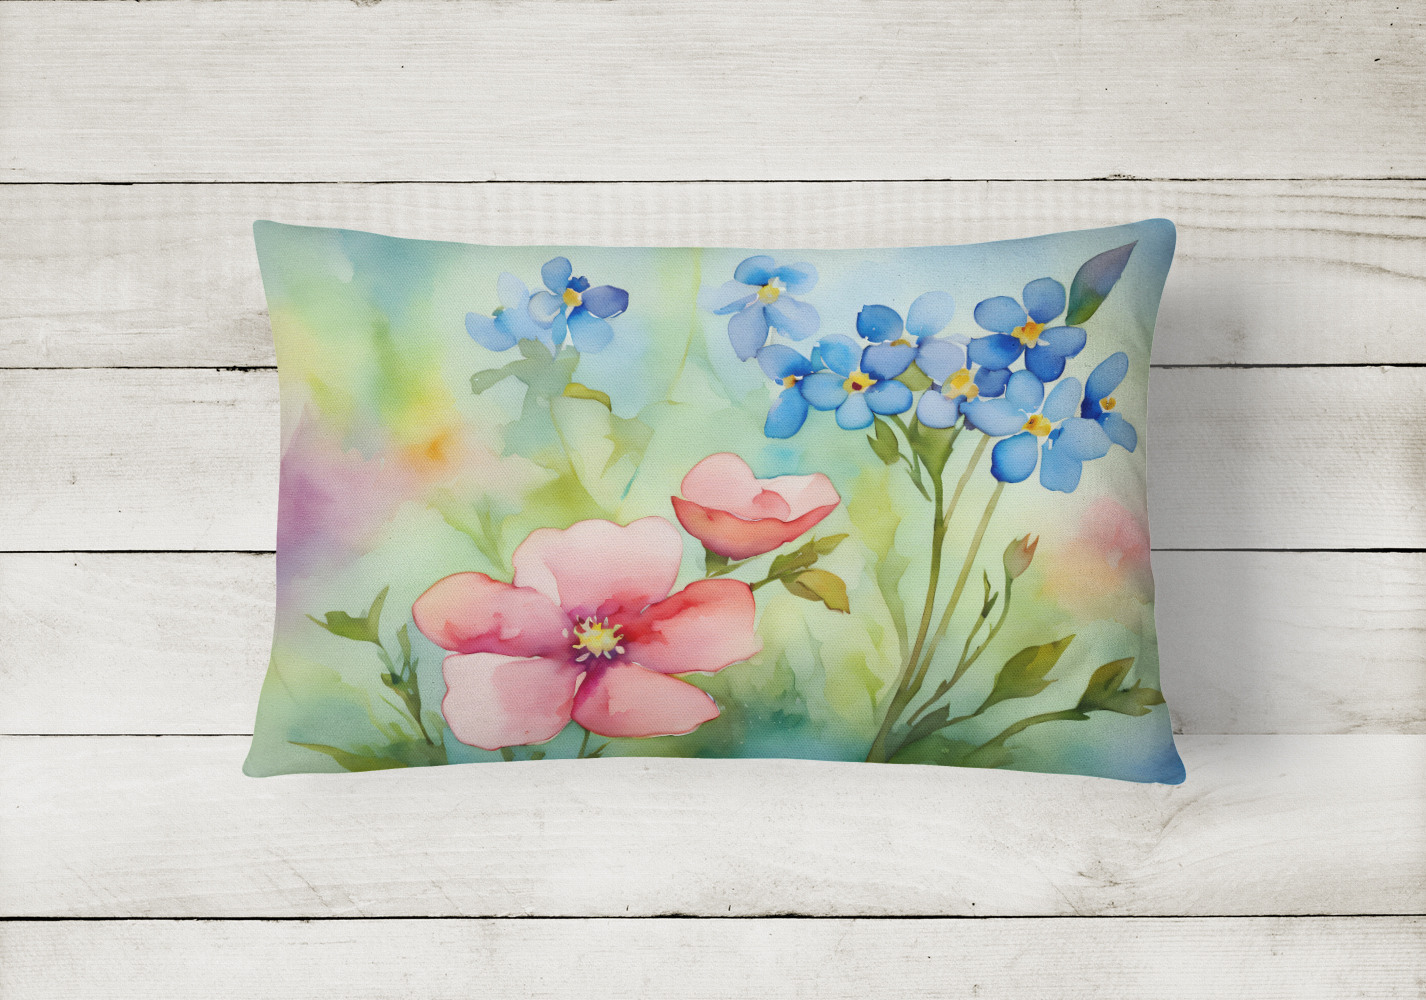 Alaska Forget-me-nots in Watercolor Fabric Decorative Pillow 12 in x 16 in - image 2 of 4